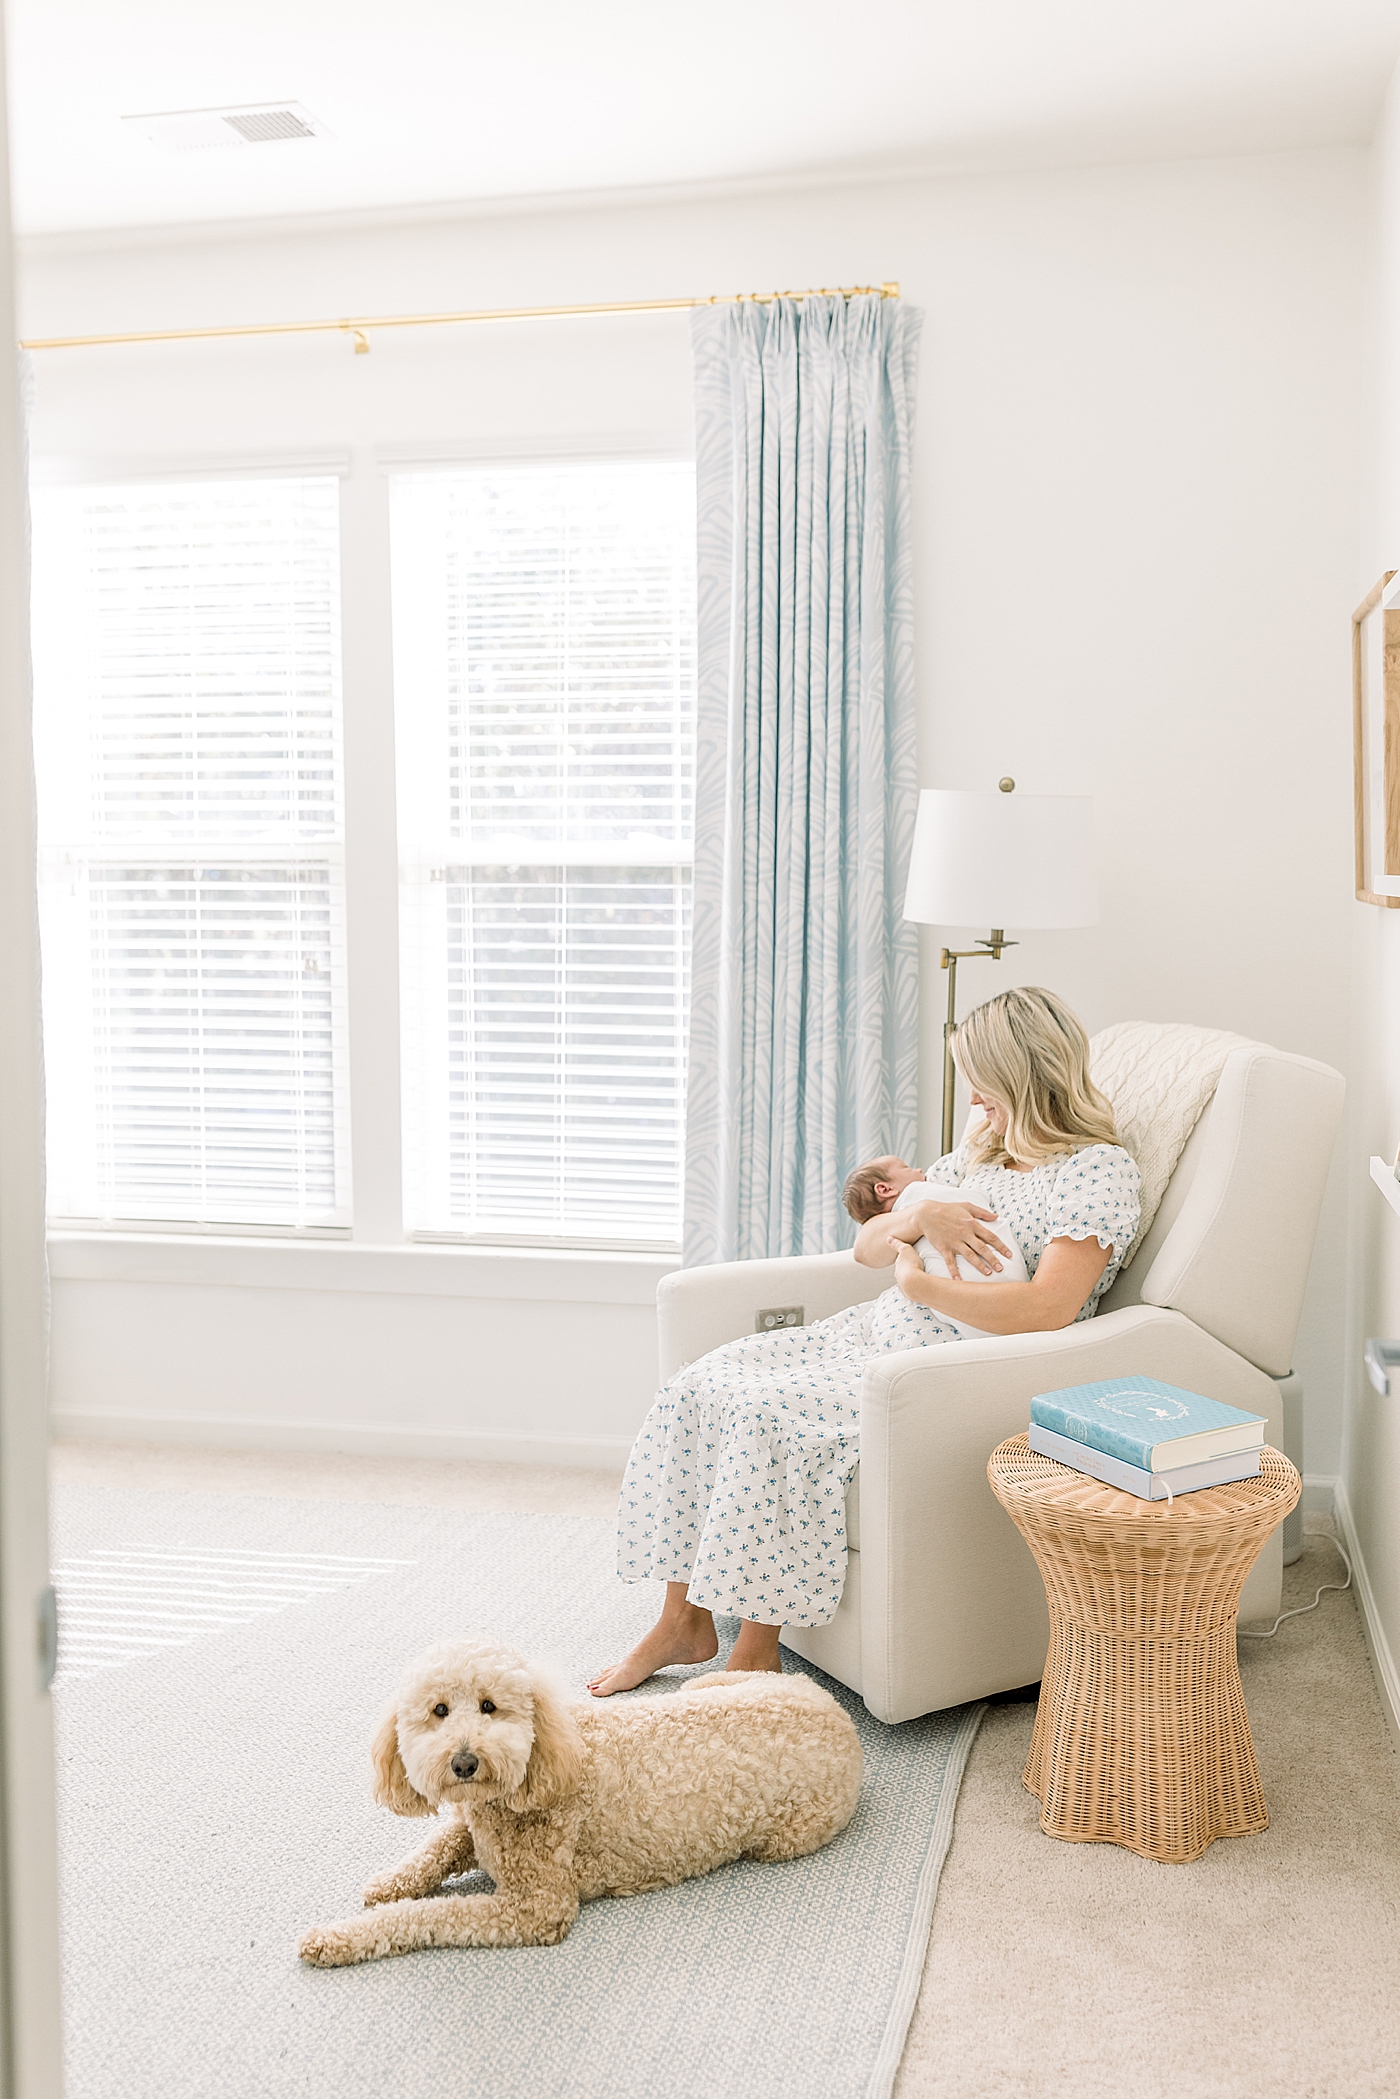 Mother holding her baby while sitting in a corner rocking chair with the family dog at her feet | Image by Caitlyn Motycka Photography